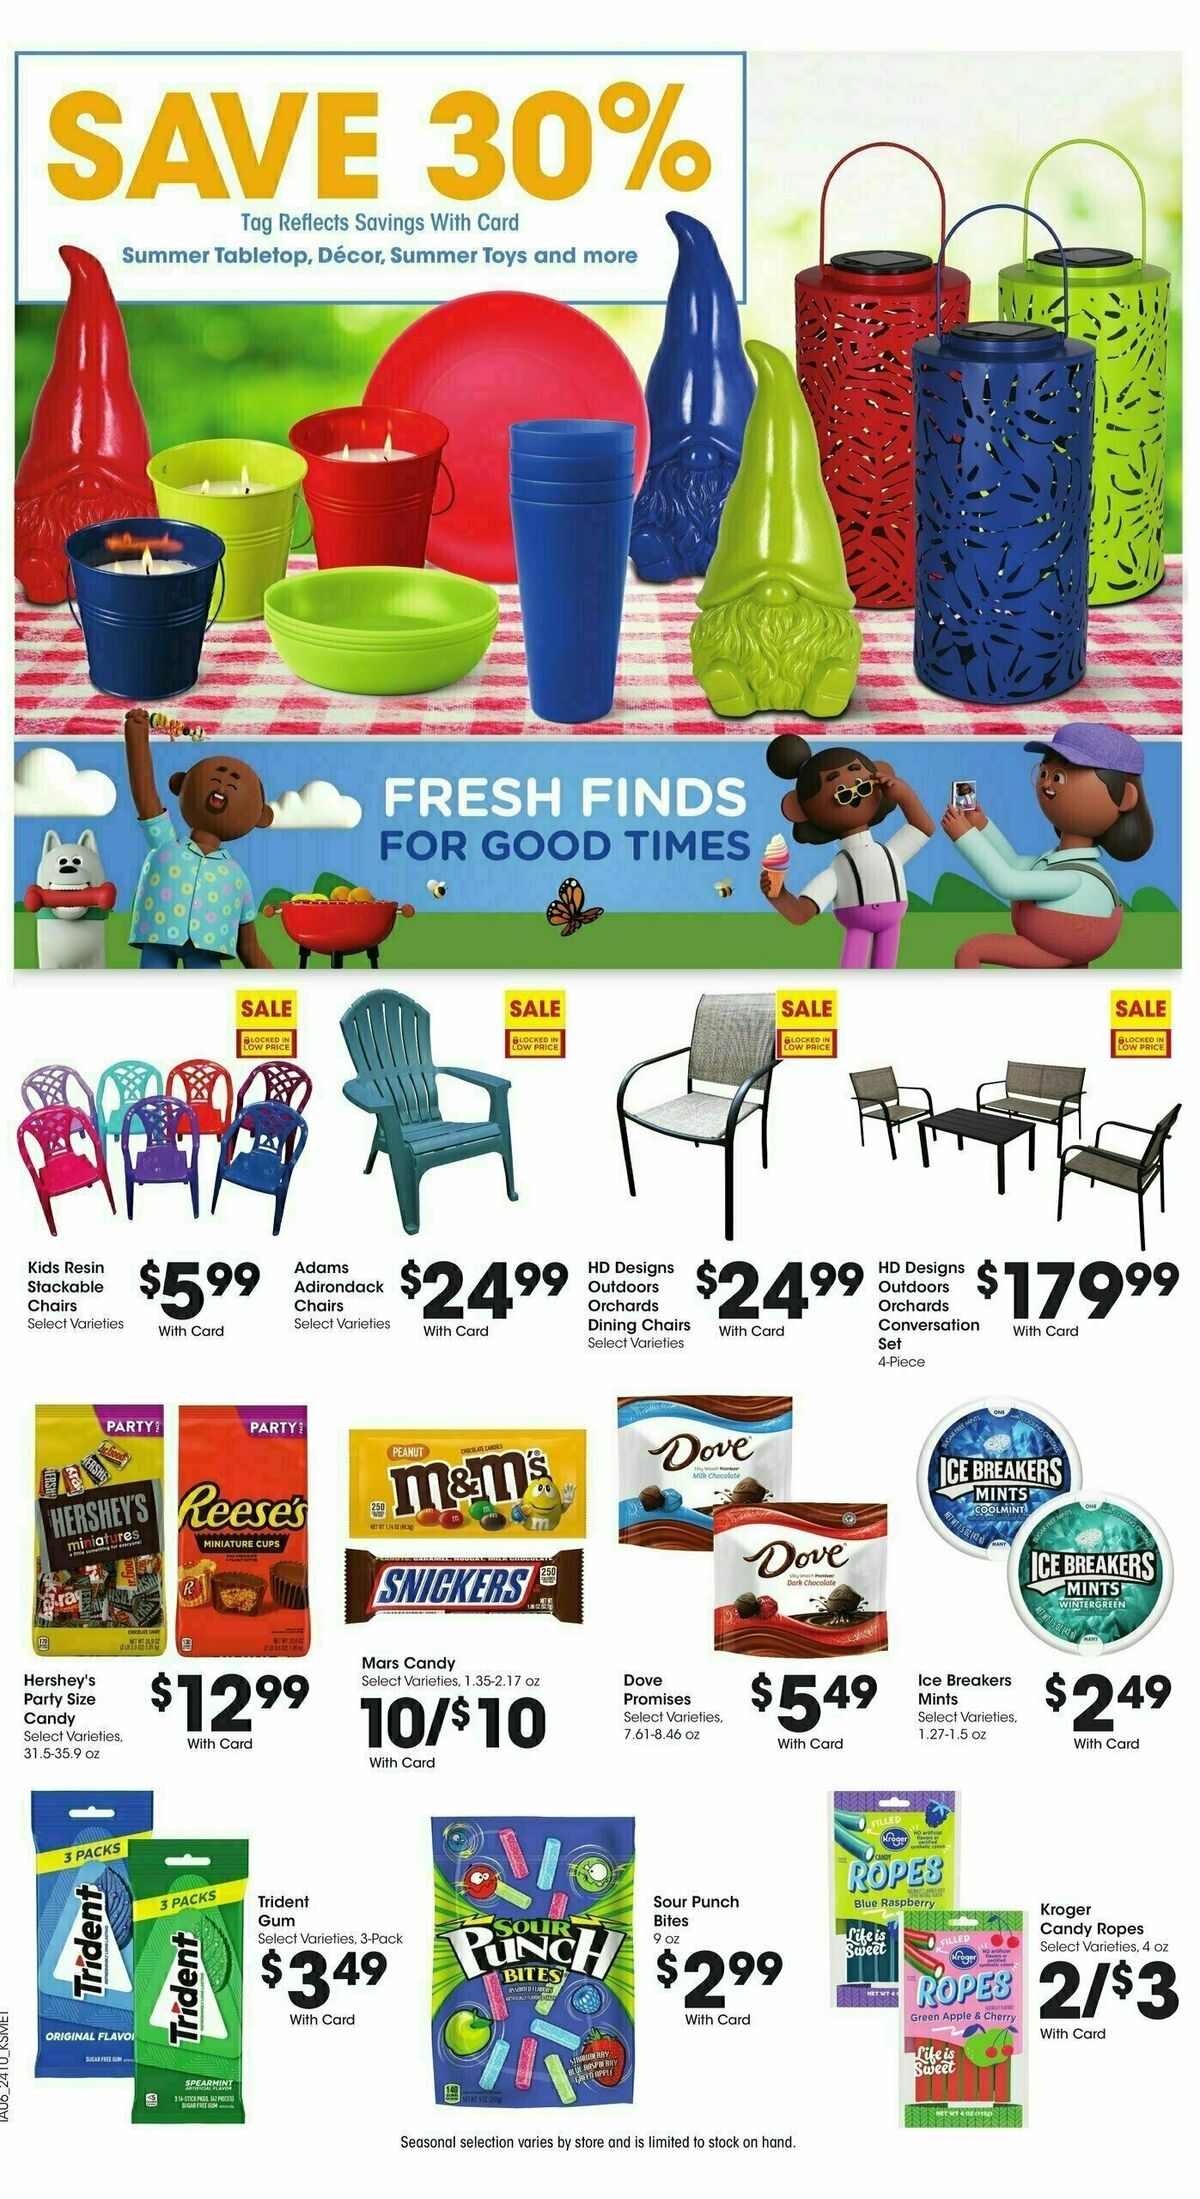 City Market Weekly Ad from April 10